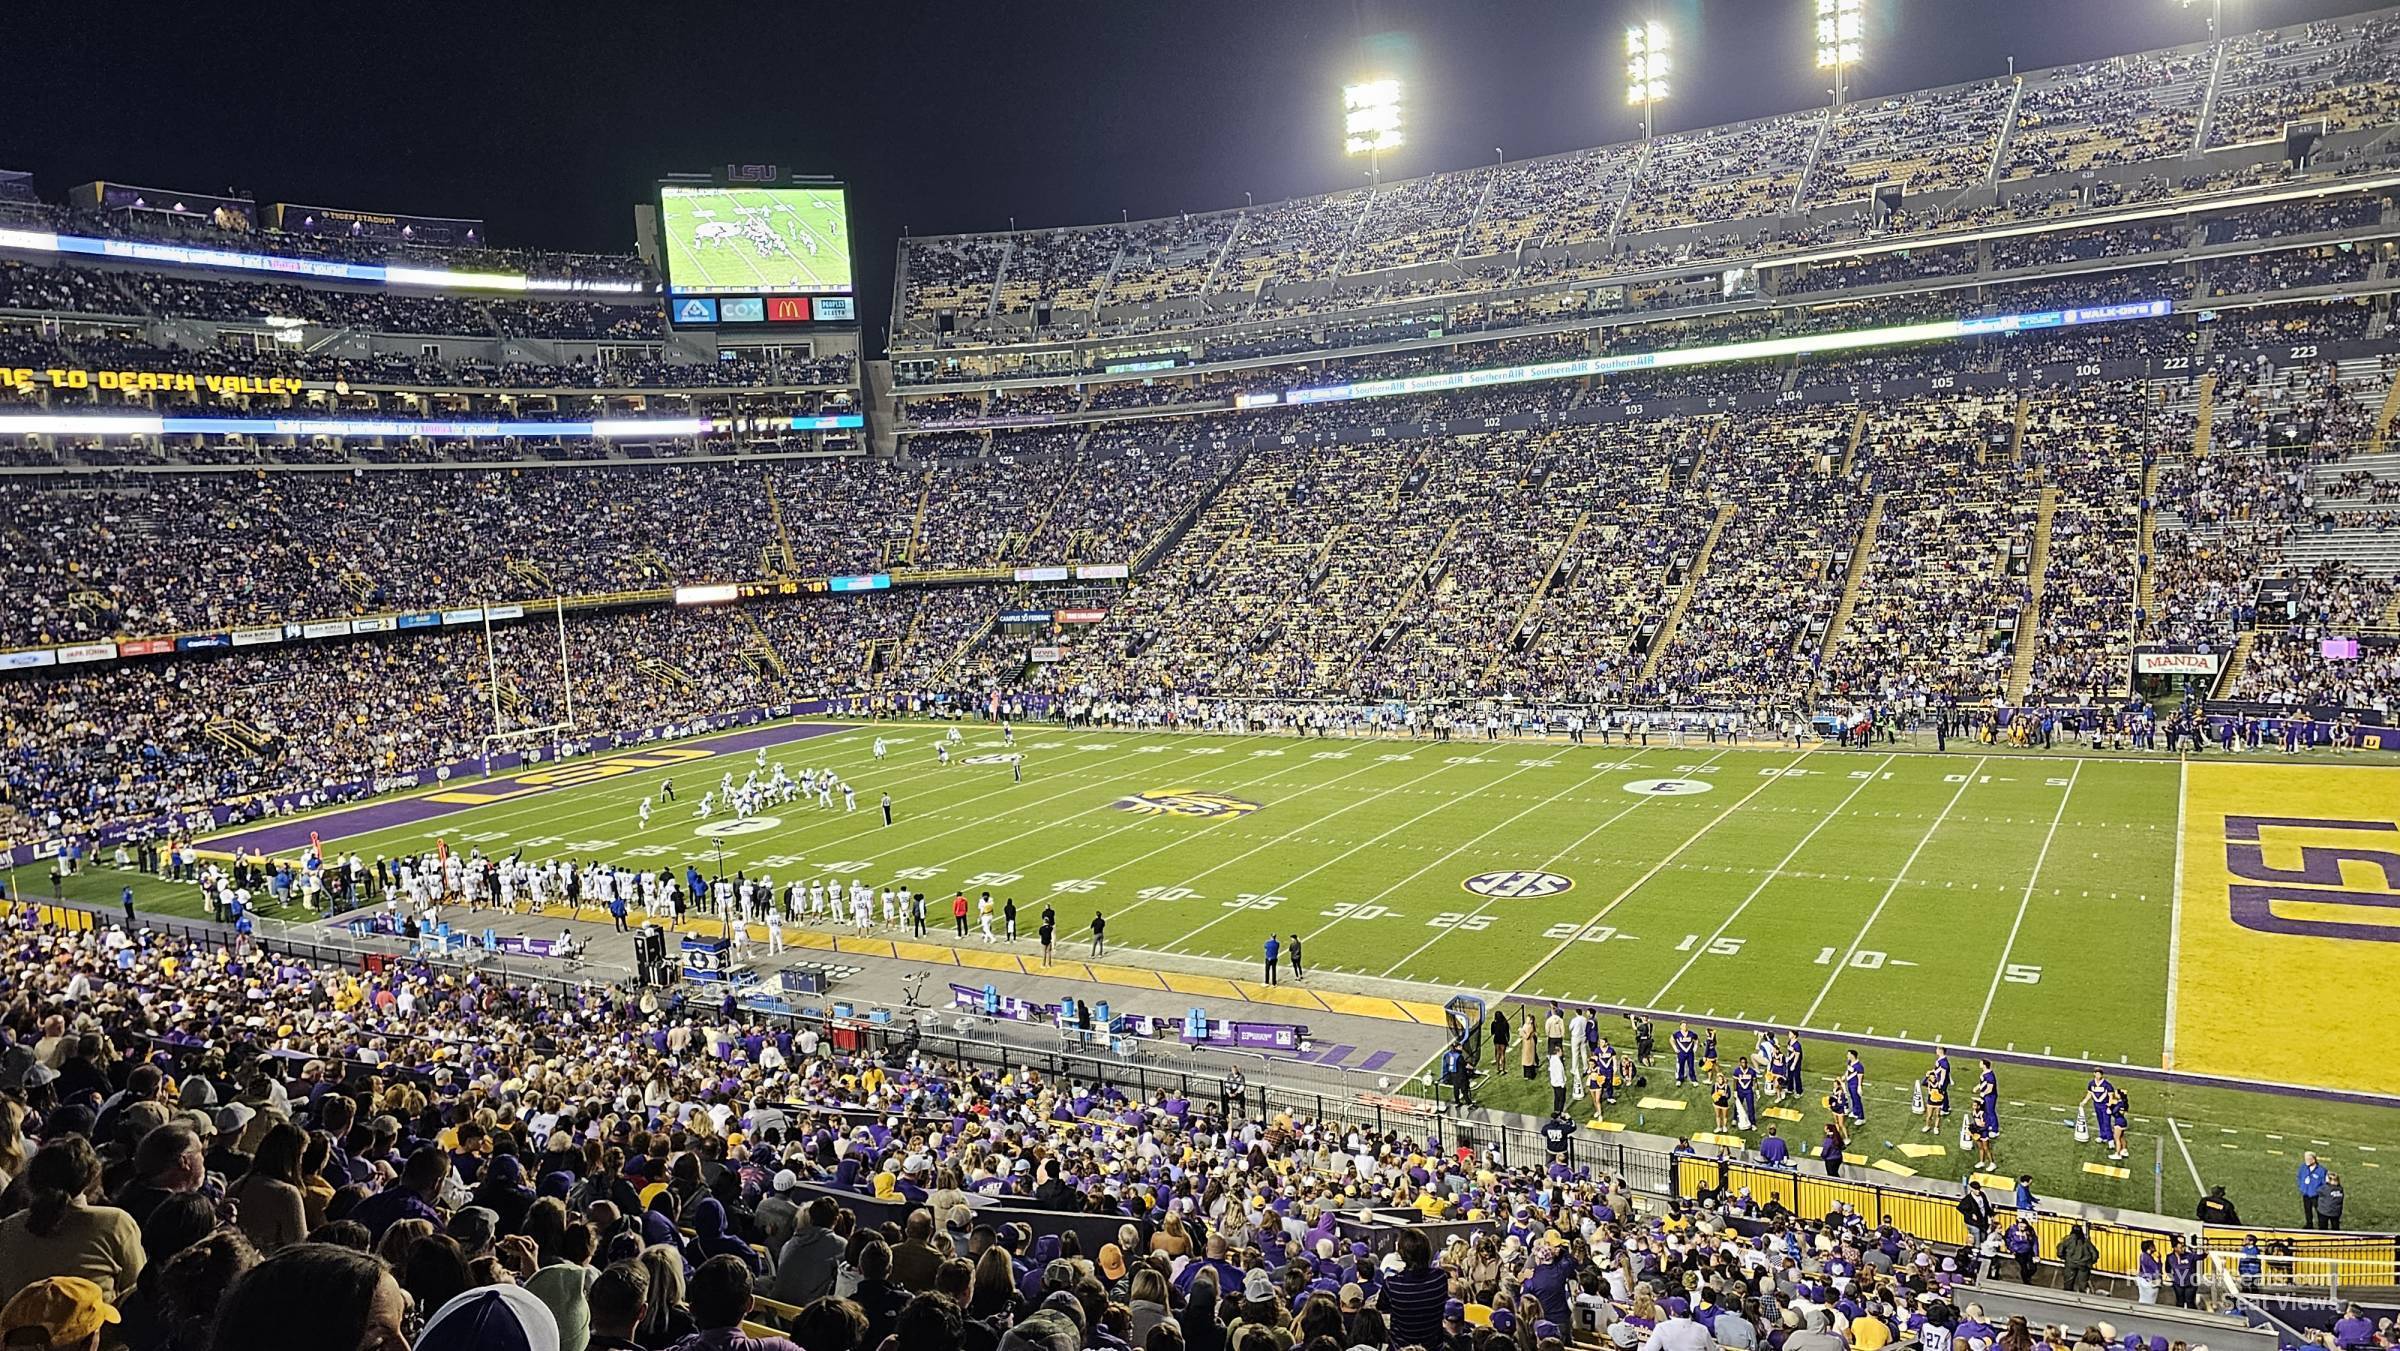 section 244, row 1 seat view  - tiger stadium